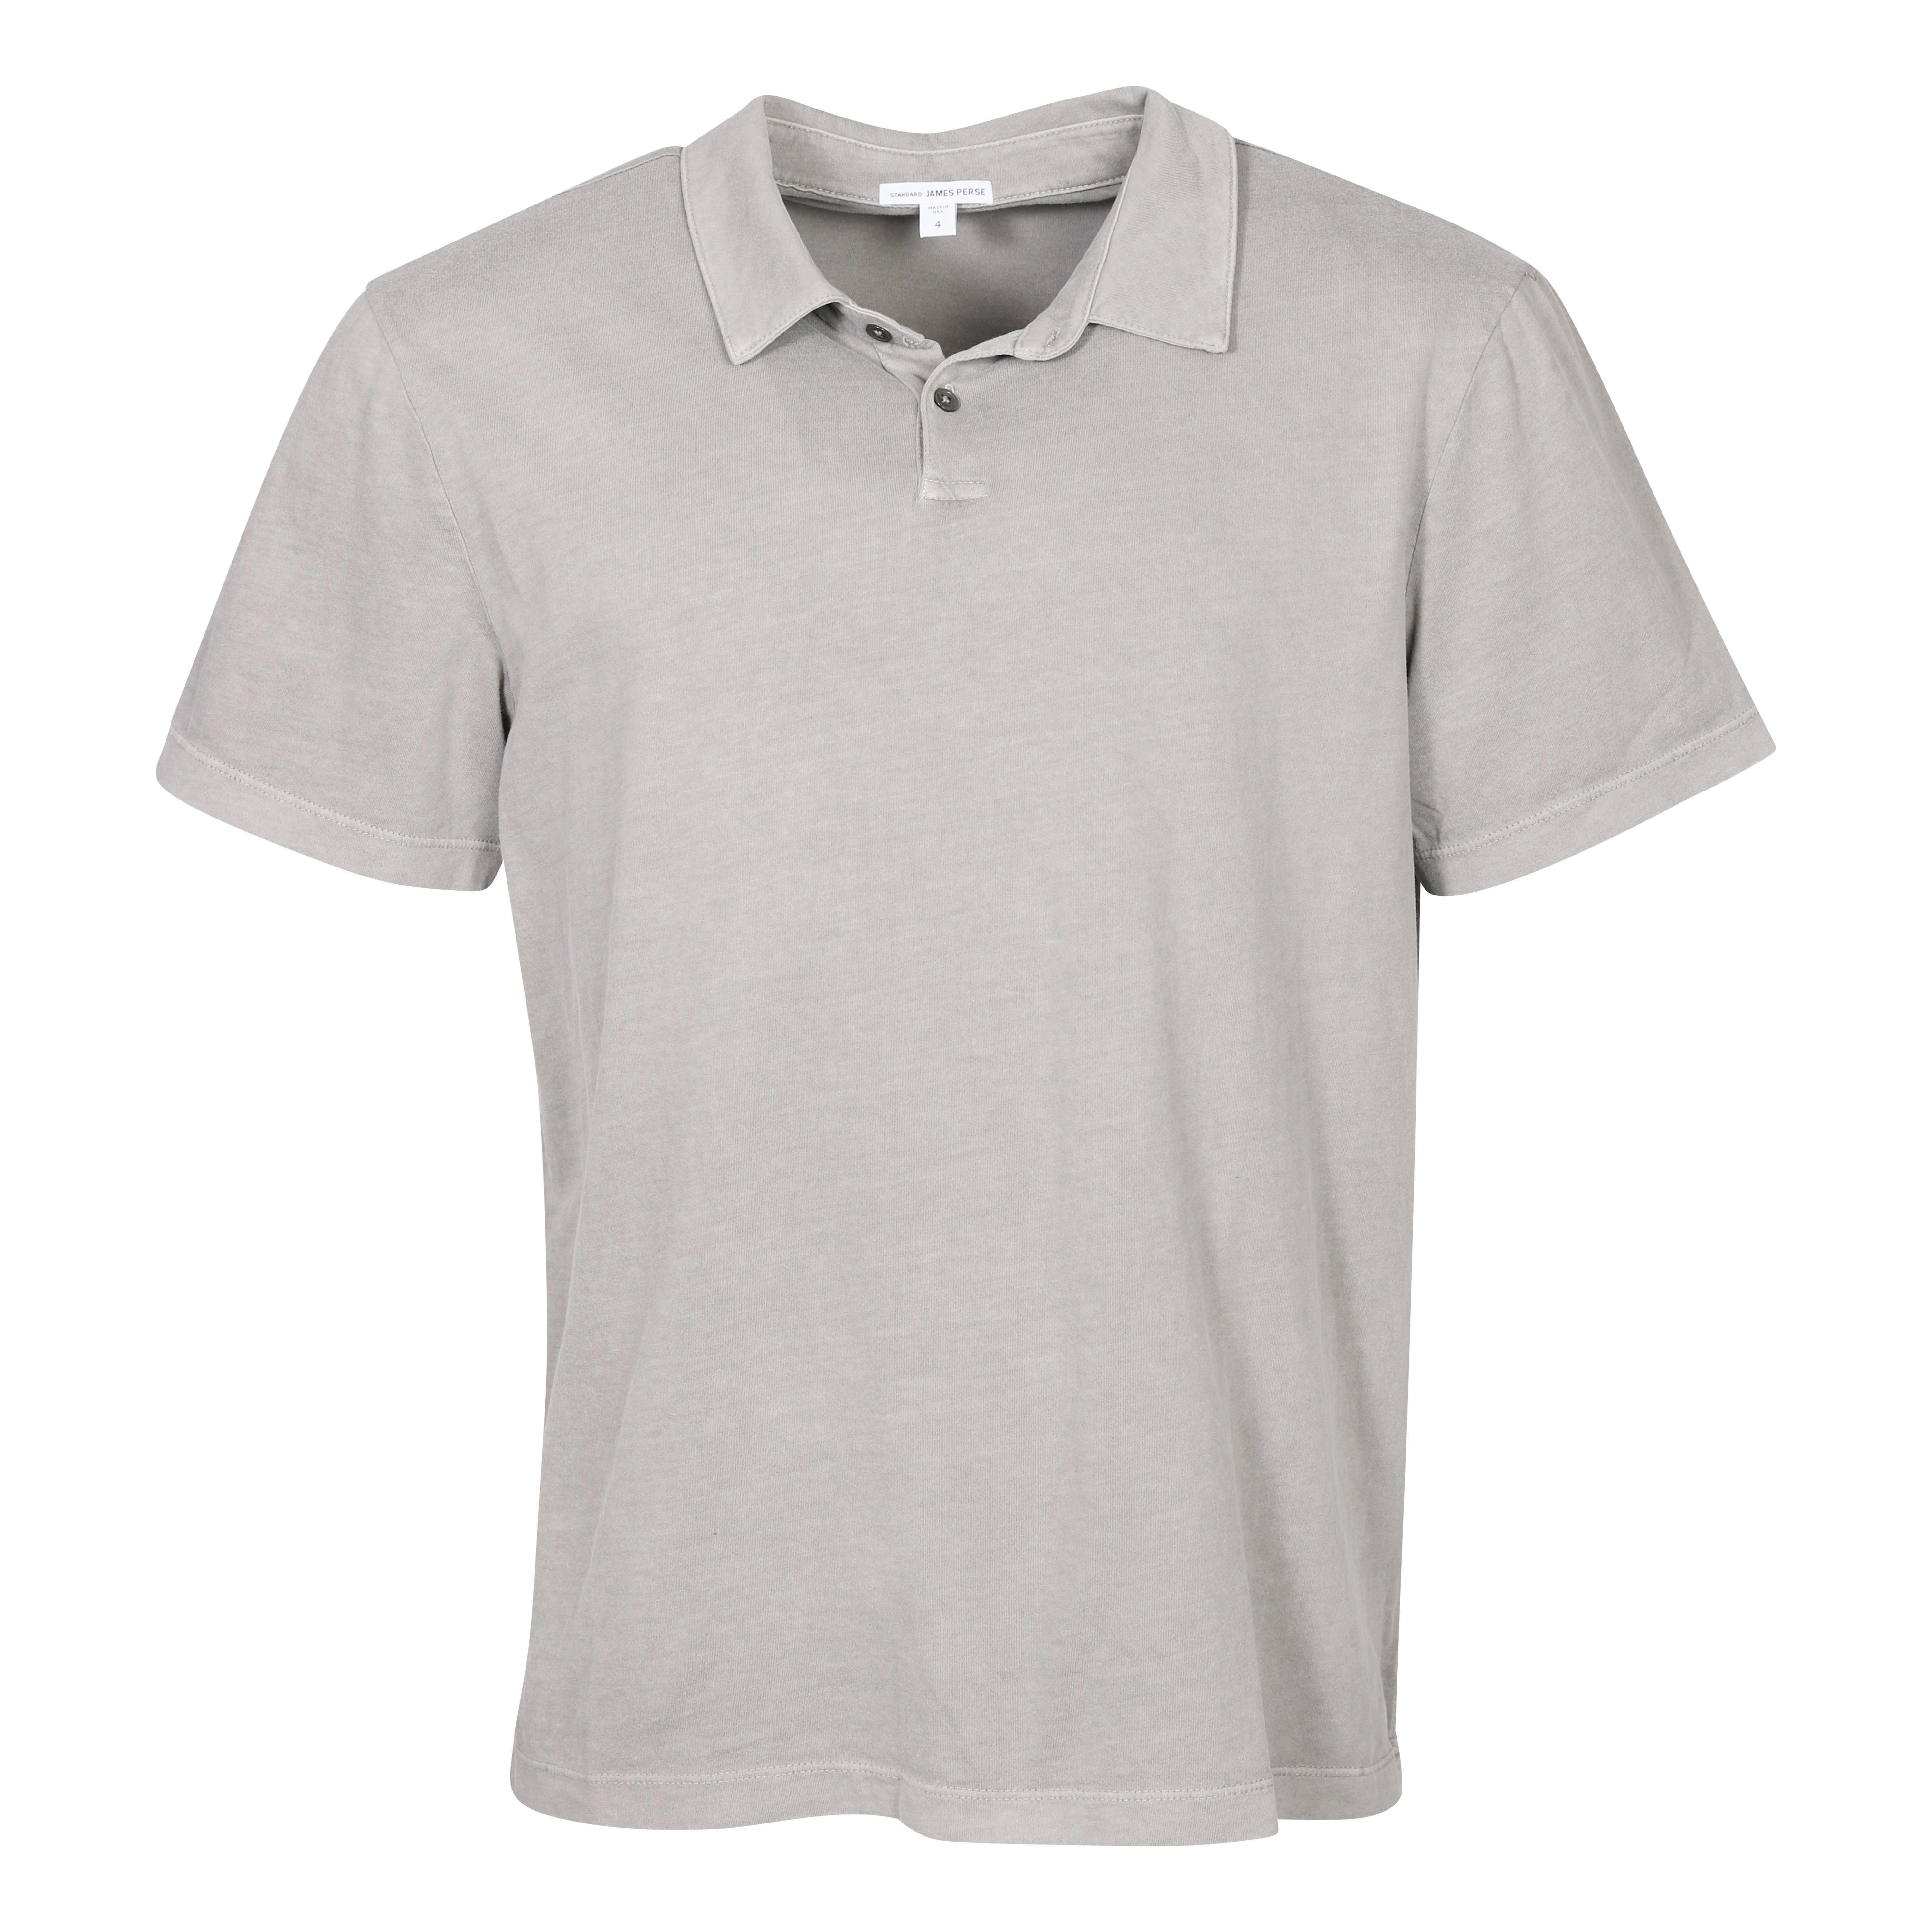 James Perse Standard Polo in Greystone XL